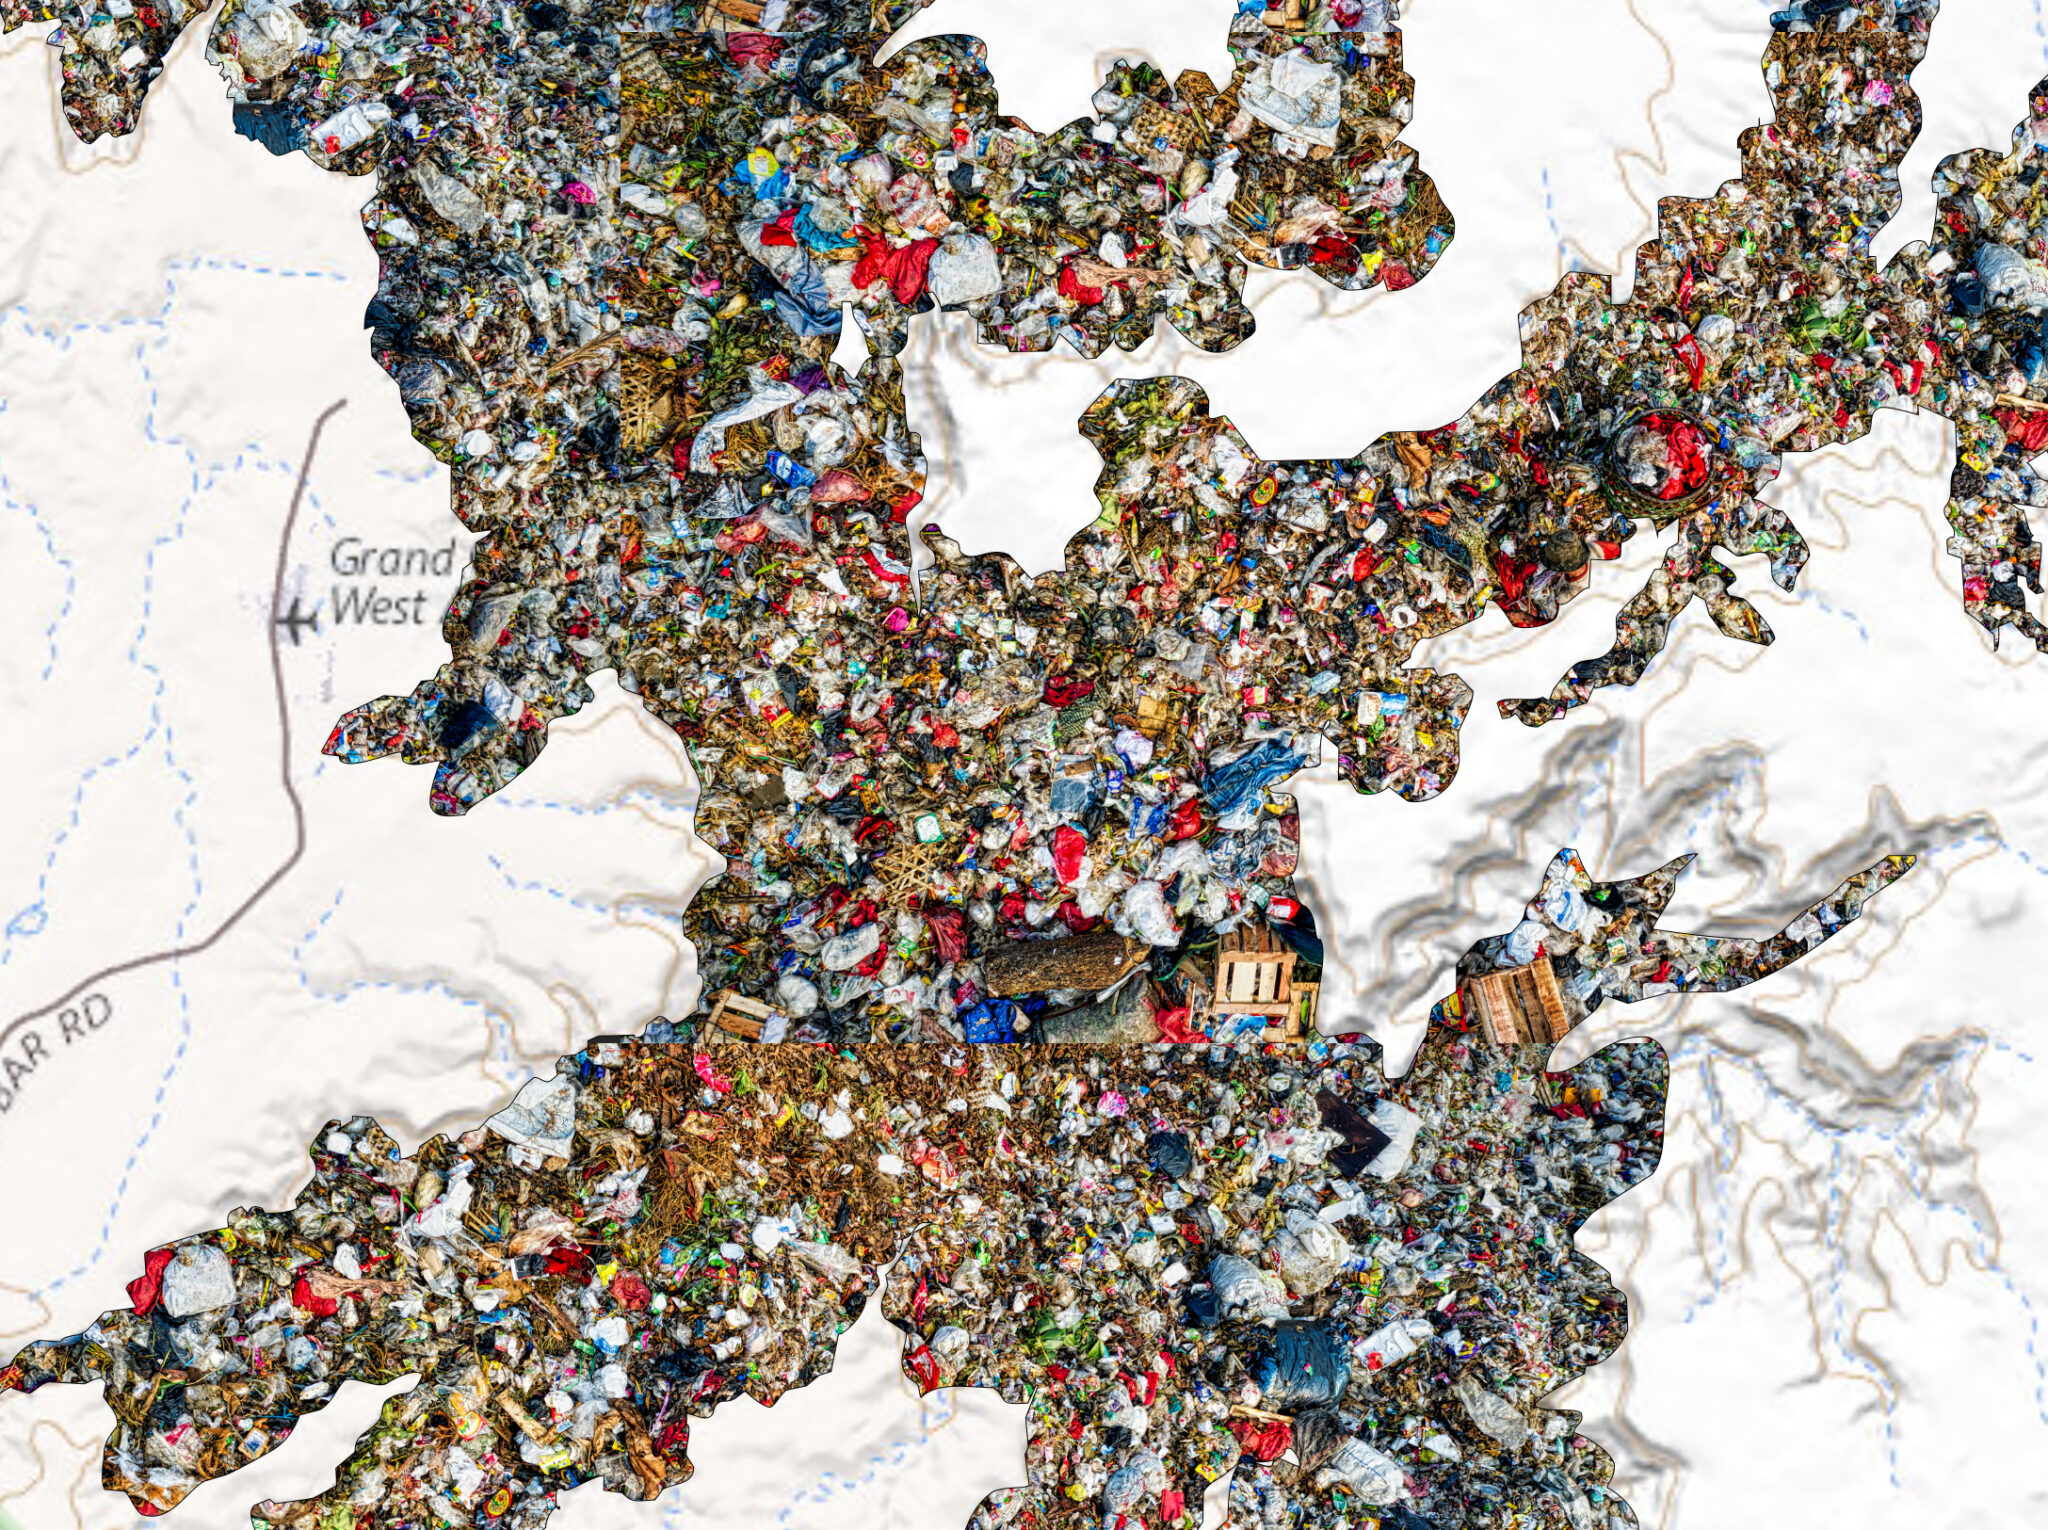 A map of the Grand Canyon with trash in it.